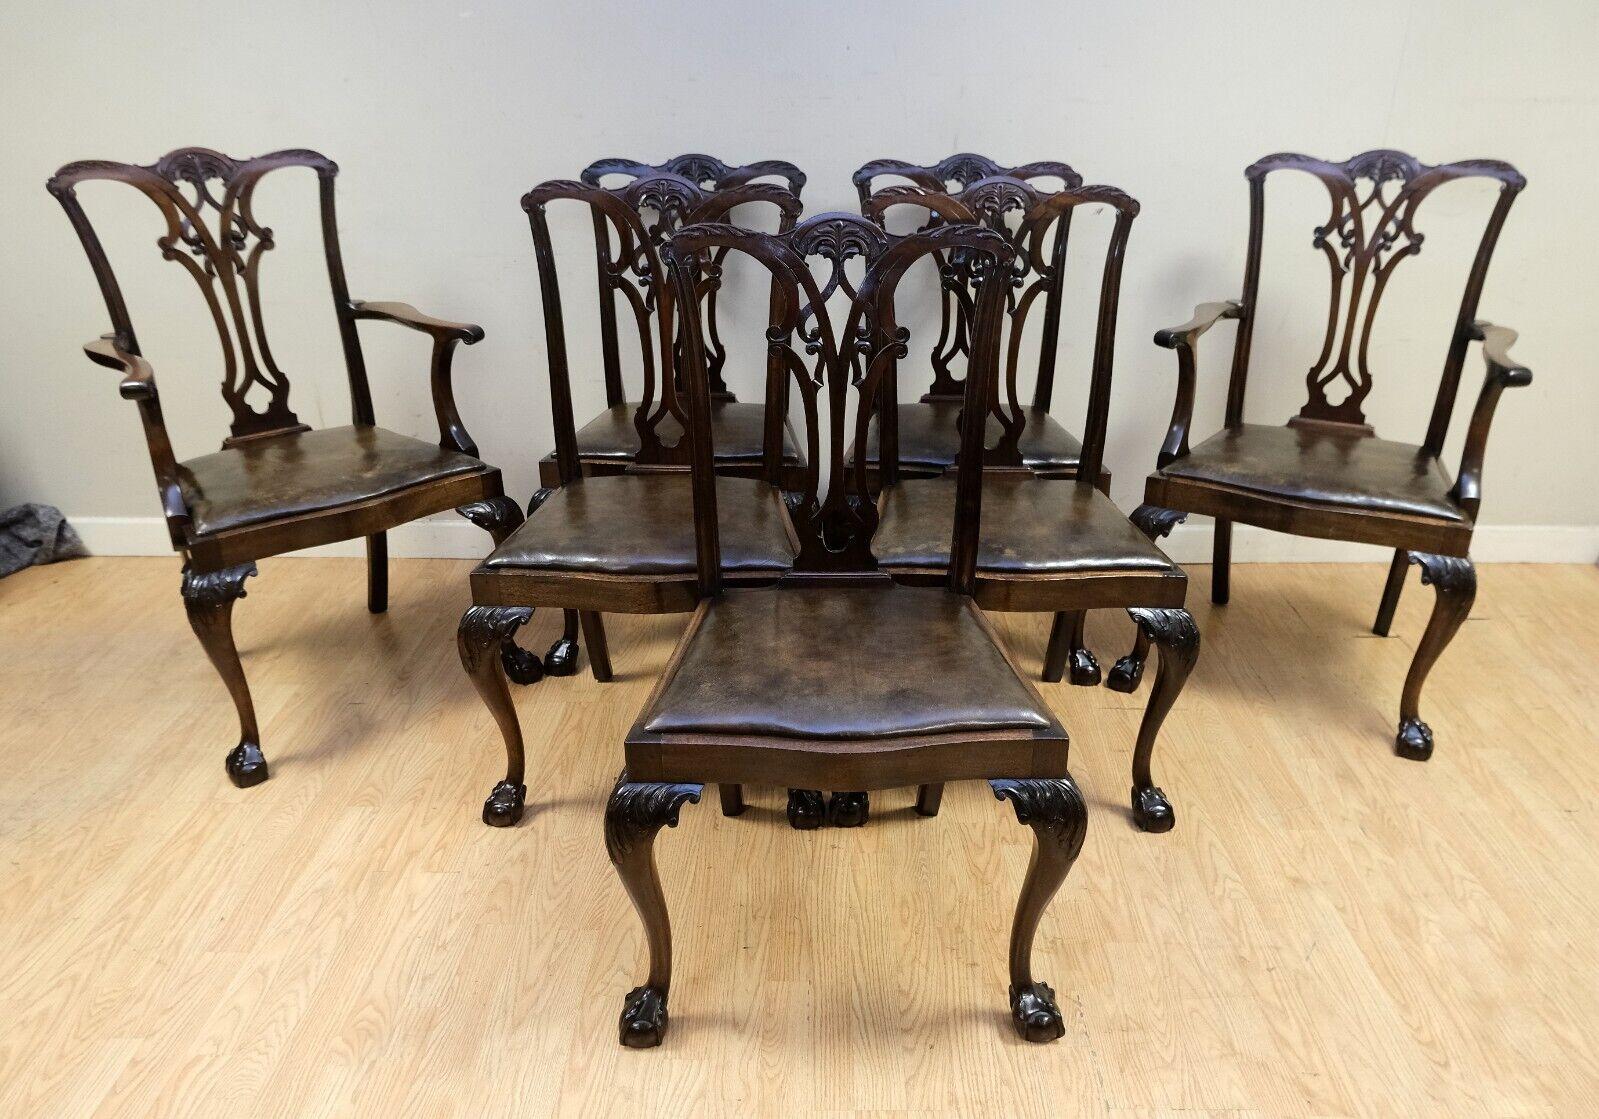 We are delighted to offer for sale this lovely Chippendale style Mahogany set of six dining chairs with leather seats and carvings. 

This elegant and Classic set consists of five single dining chairs and two carvers, raised on cabriole legs